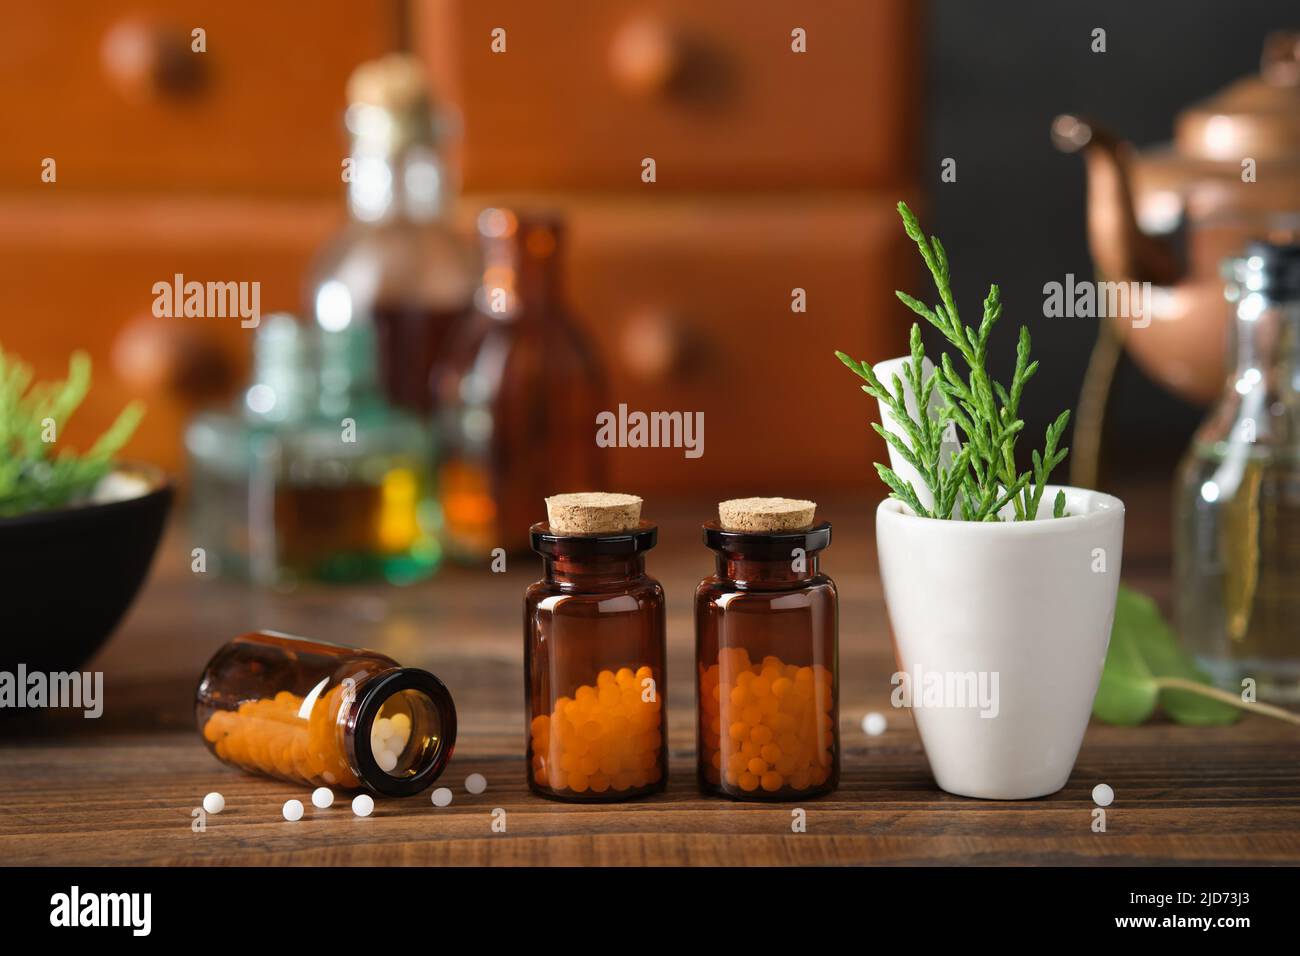 Bottles of homeopathic granules, cabinet with homeopathic remedies and tincture bottles on background. Homeopathy medicine concept. Stock Photo